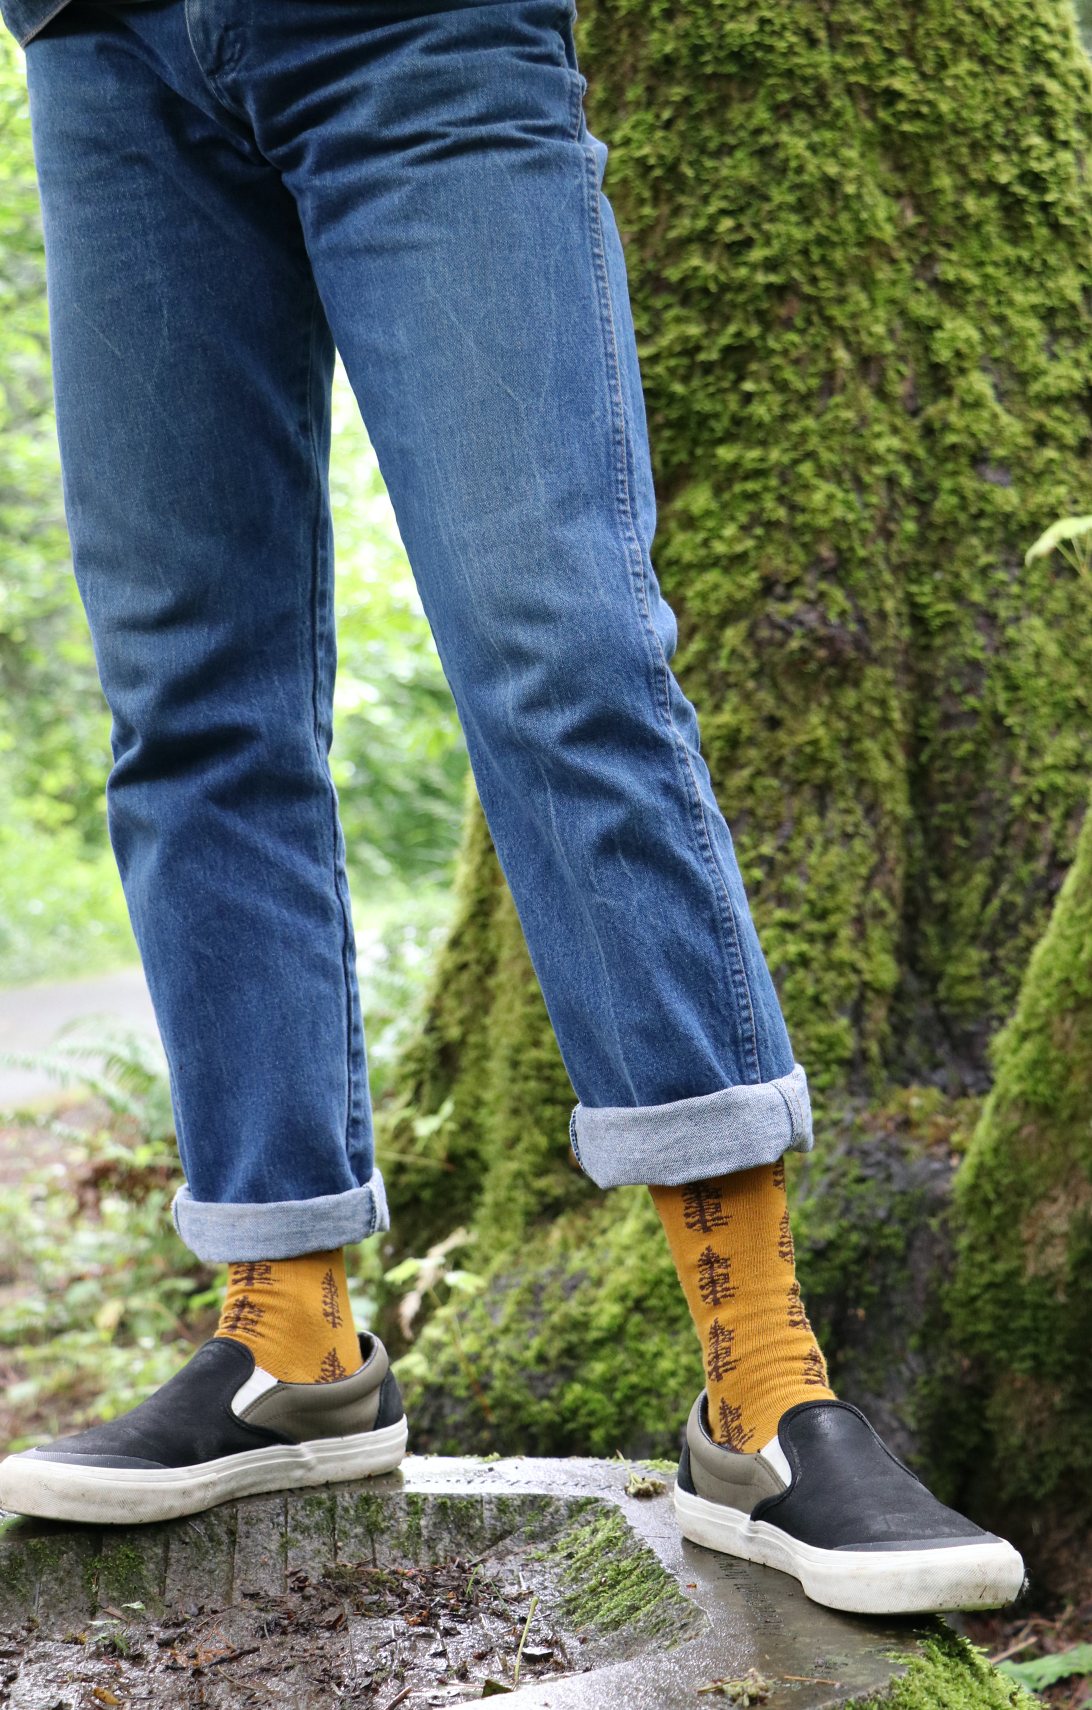 TABBISOCKS brand Replant Pairs Tree Socks in Mustard color with Grey color at the cuff and toe for the insert color, and a woman in jeans wearing socks with a brown tree design overall standing in the forest